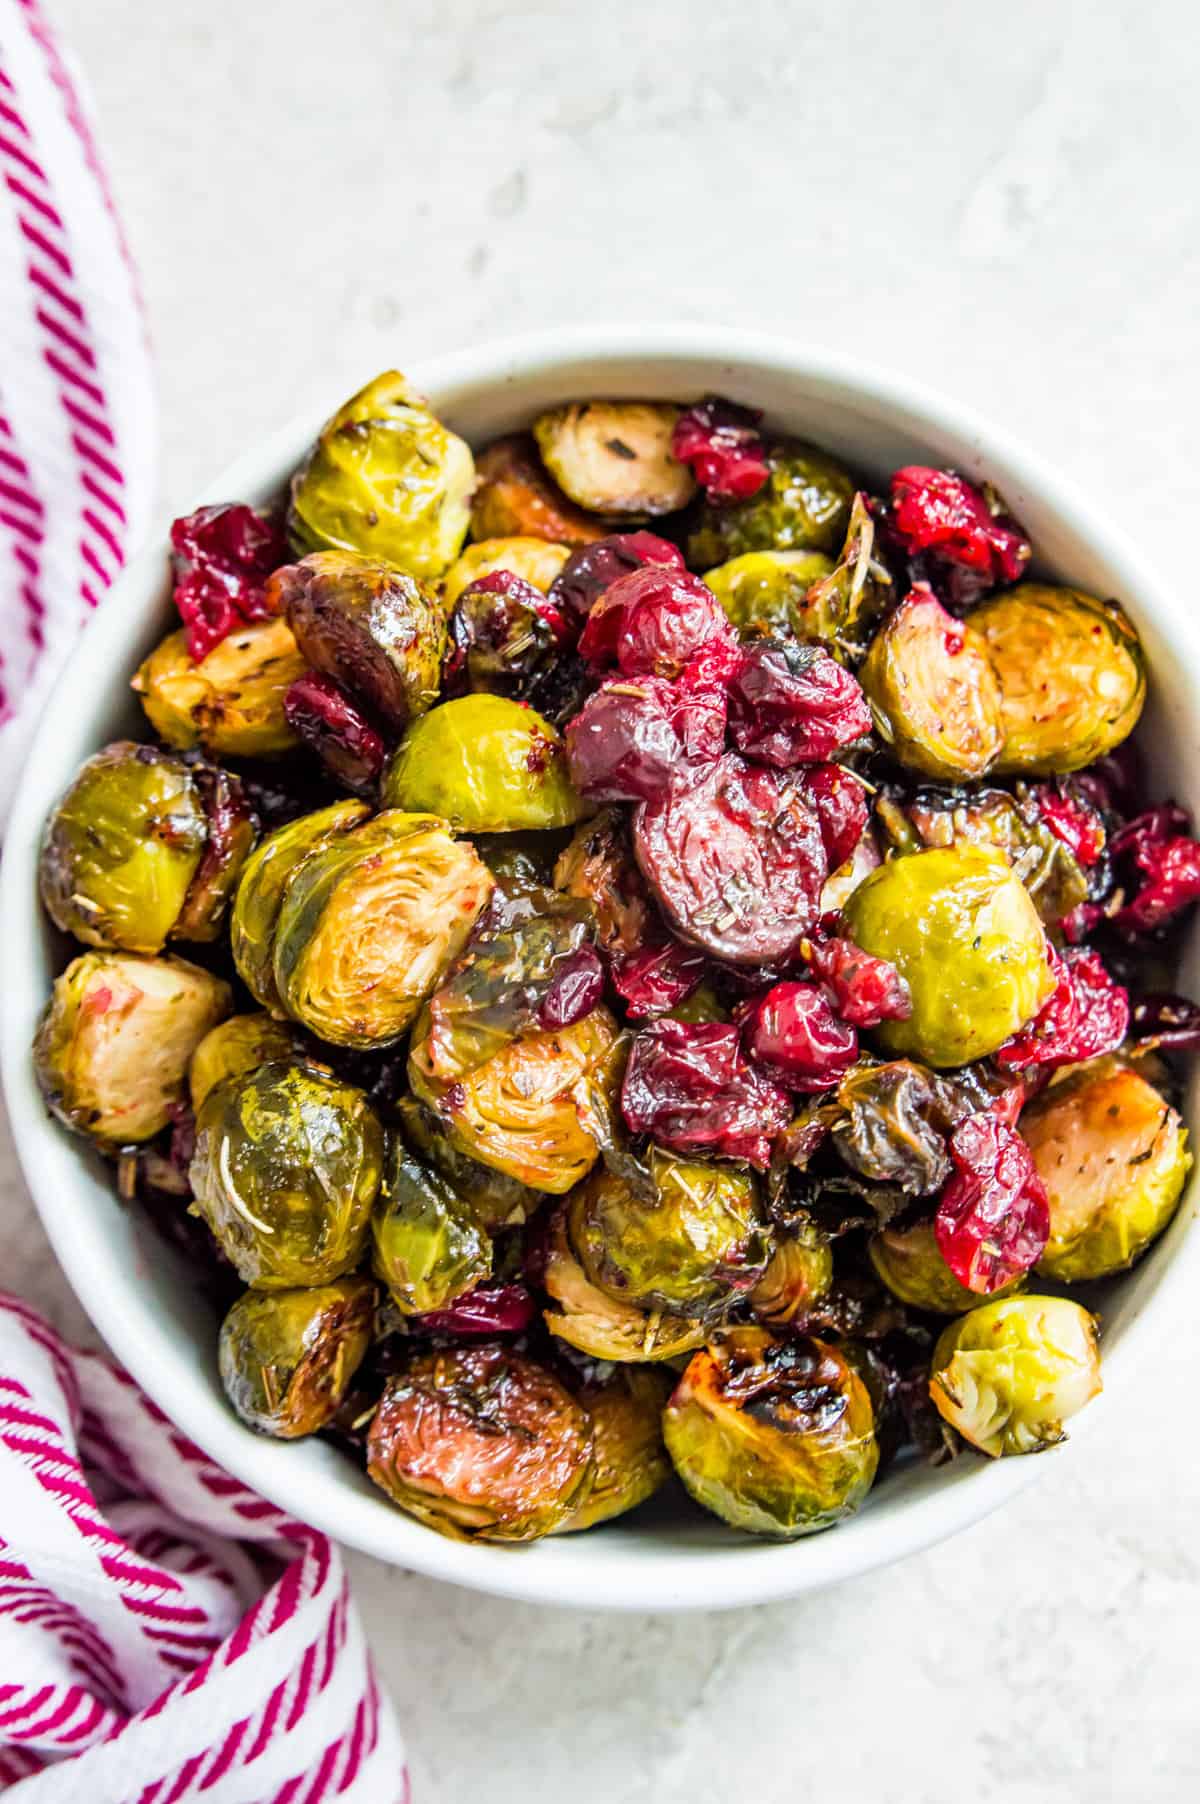 A bowl or roasted Brussels sprouts with cranberries and herbs and a tea towel beside it.